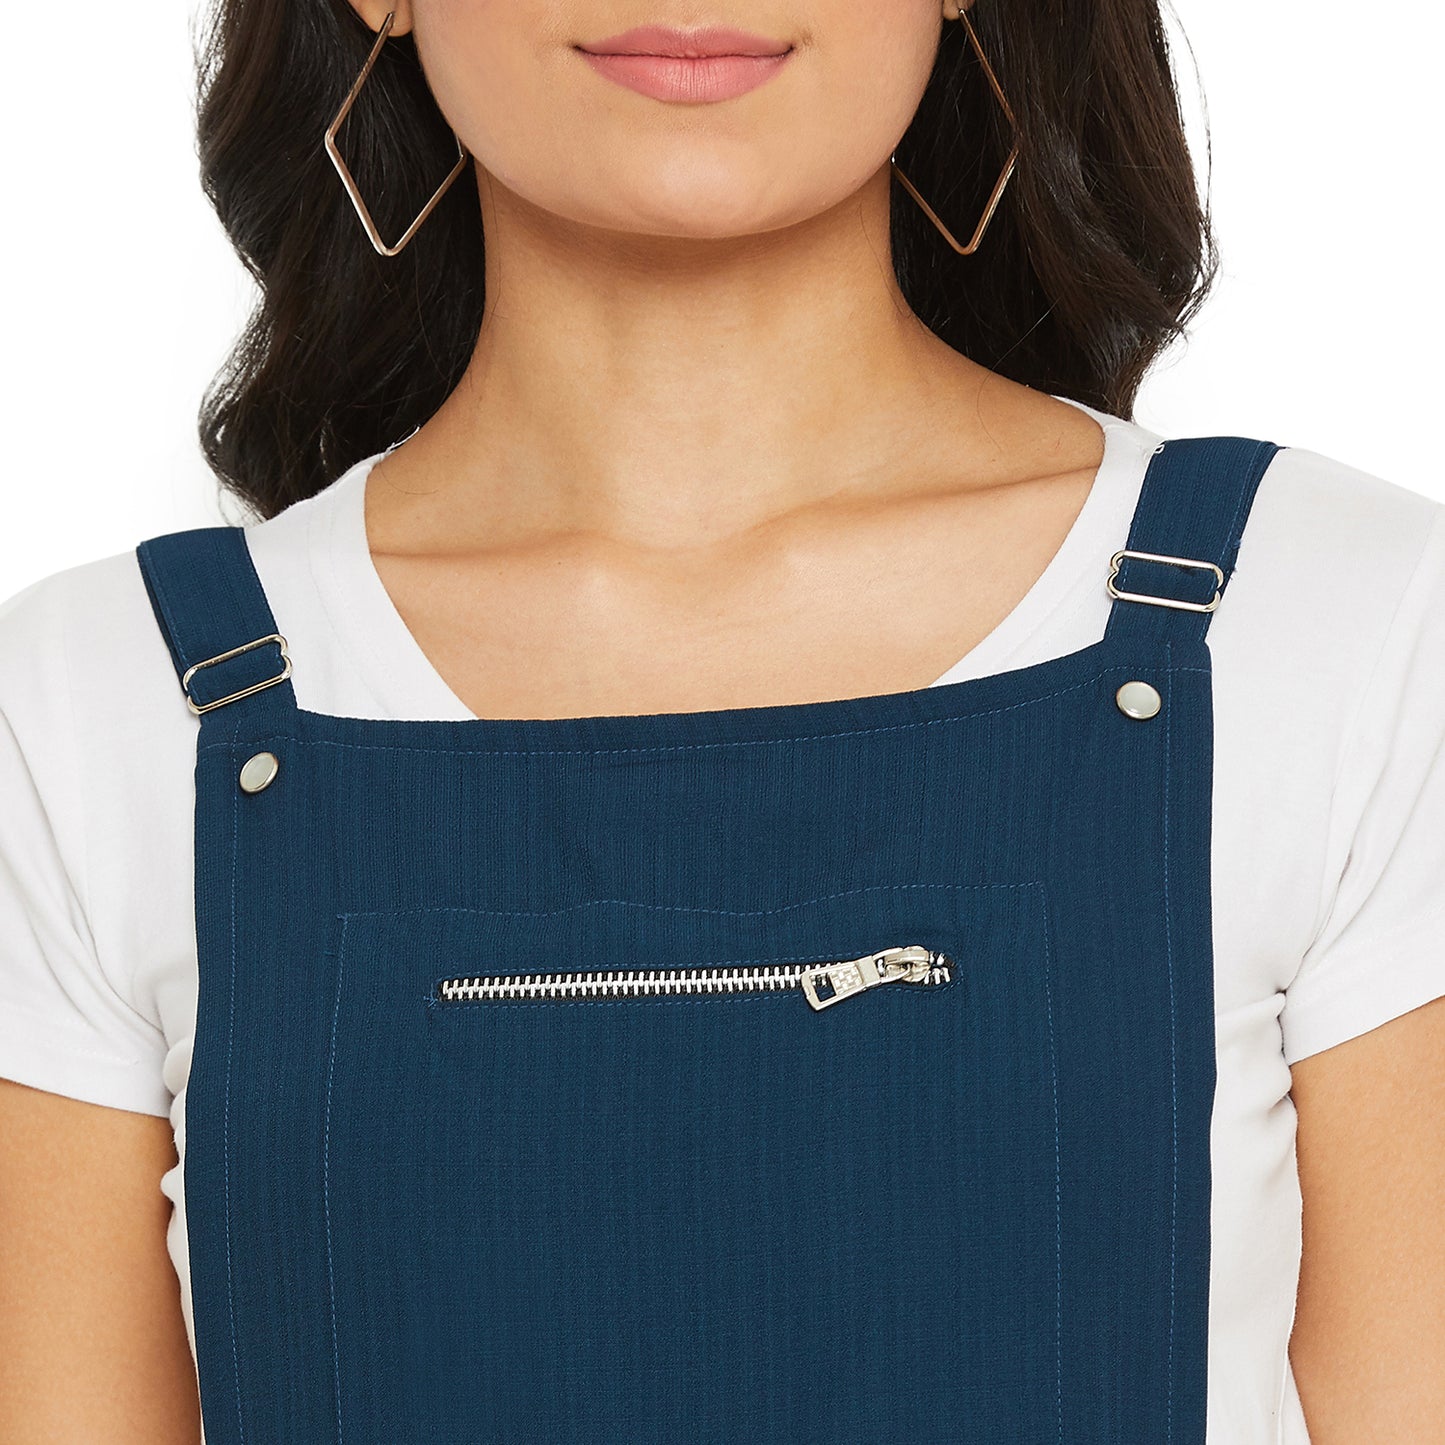 Teal solid dungarees with side stripes detail